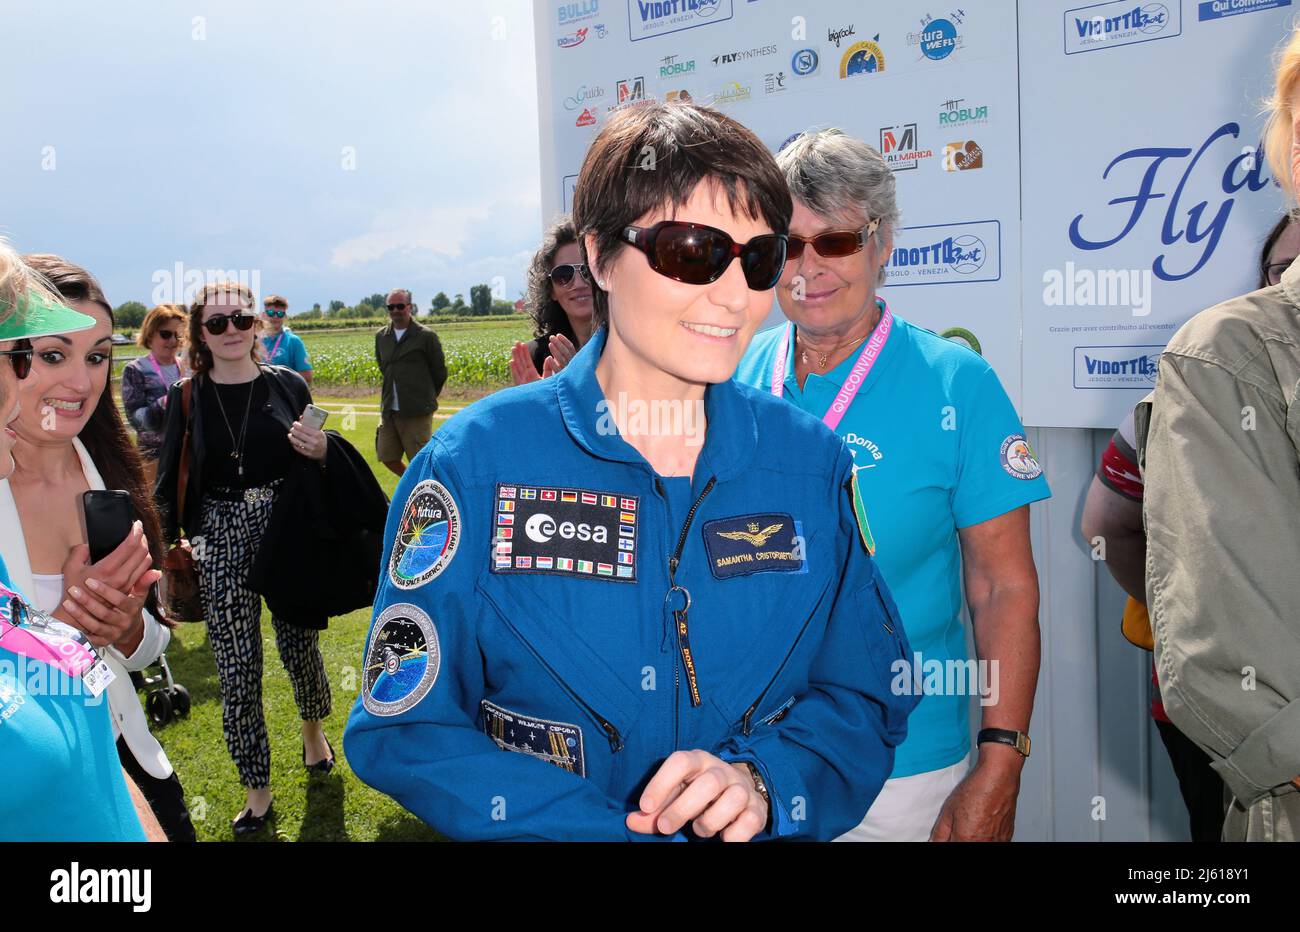 Samantha Cristoforetti at the 7th International Meeting Ladies Pilot  in the 2016 Stock Photo